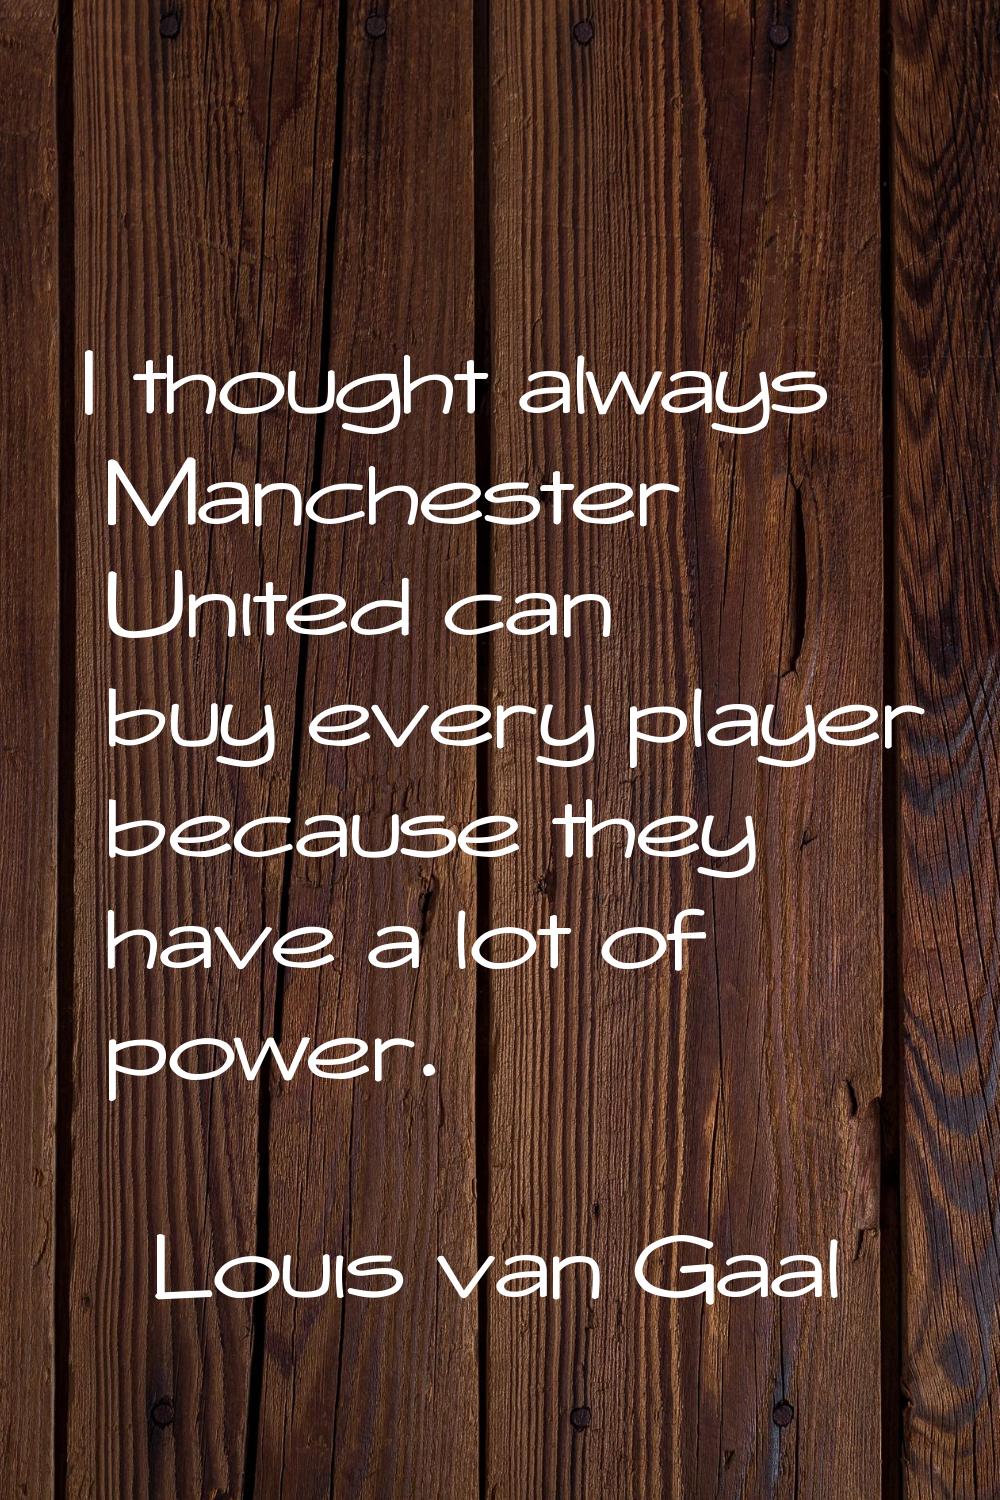 I thought always Manchester United can buy every player because they have a lot of power.